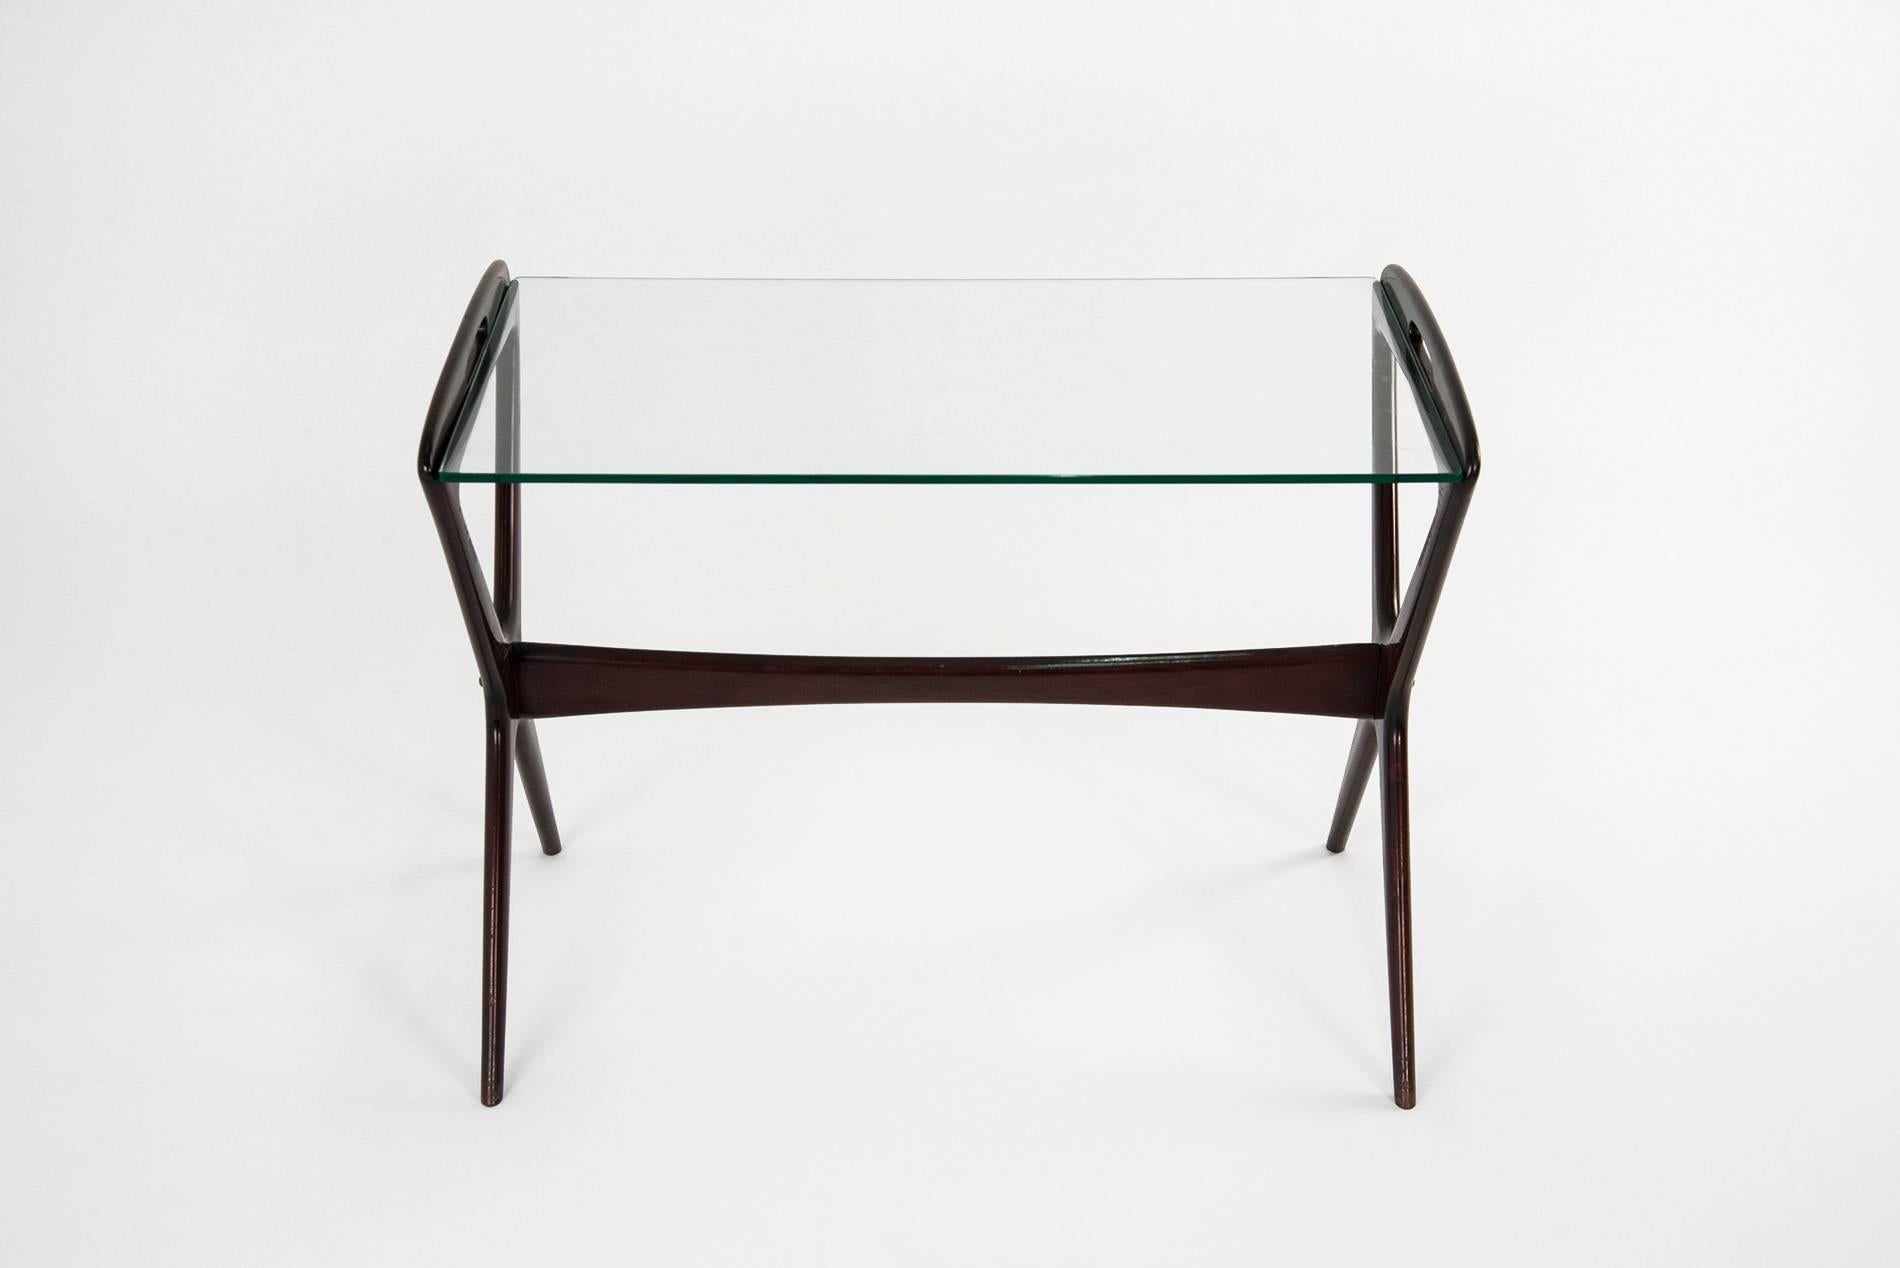 Ico Parisi for Angelo De Baggis Low table featuring a sleek design, manufactured in Italy in the 1950s. Lacquered wooden structure with handles which easily permit to carry it around, glass top, brass screws. Good original vintage conditions.